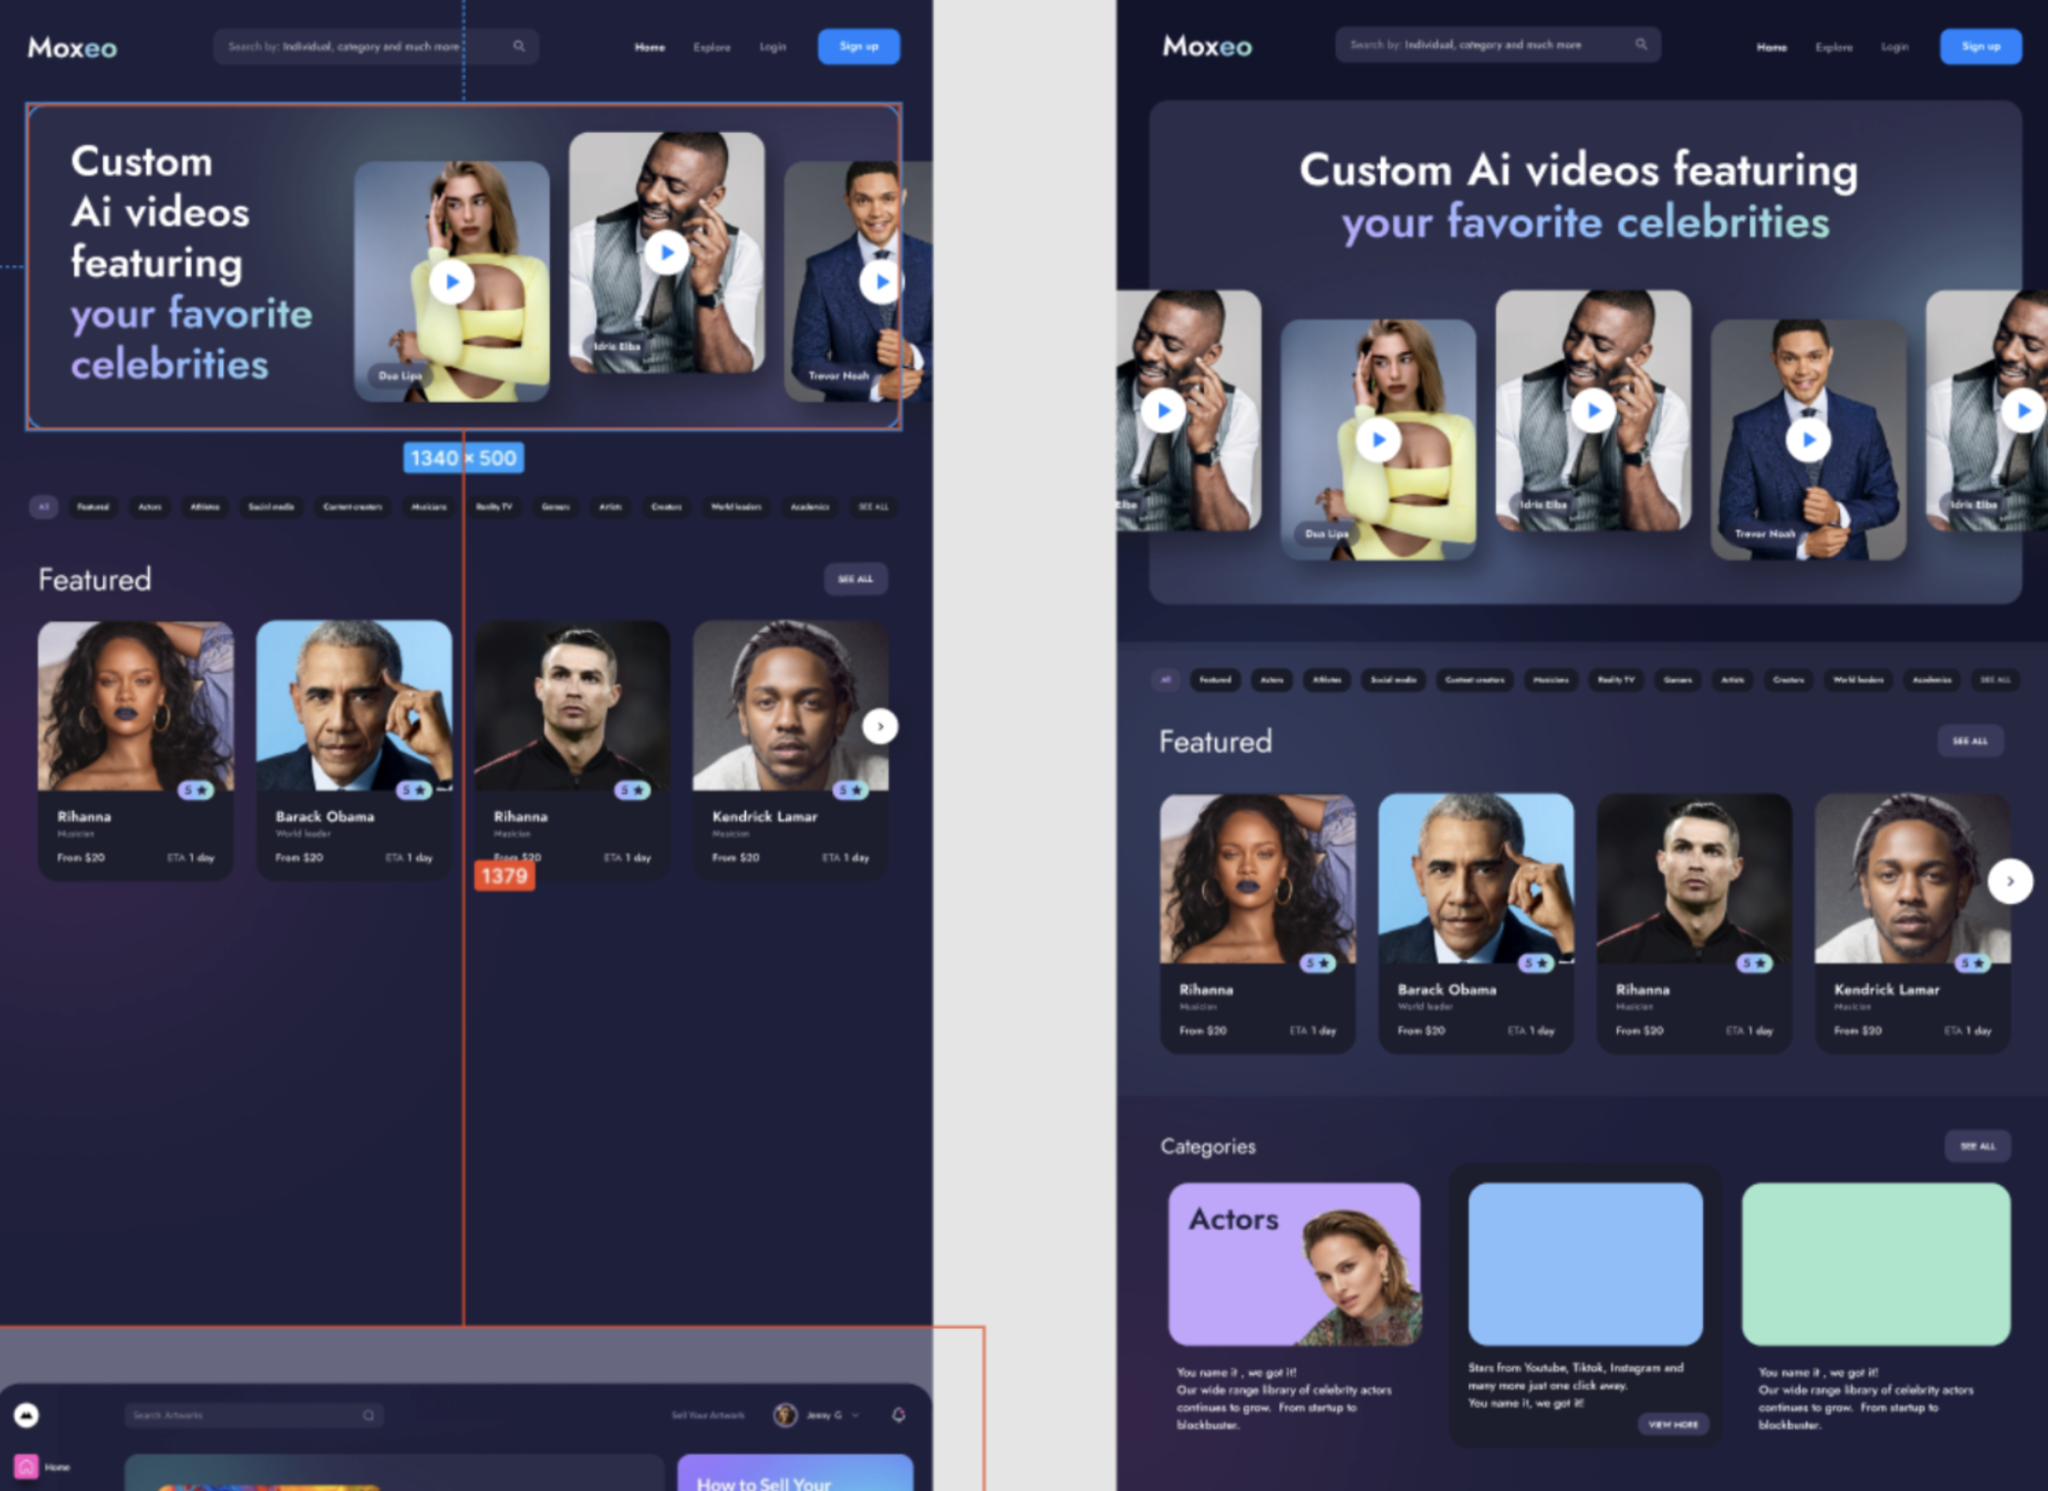 Two screens showing the celebrity custom AI video product, including Rihanna, Barack Obama and Kendrick Lamar